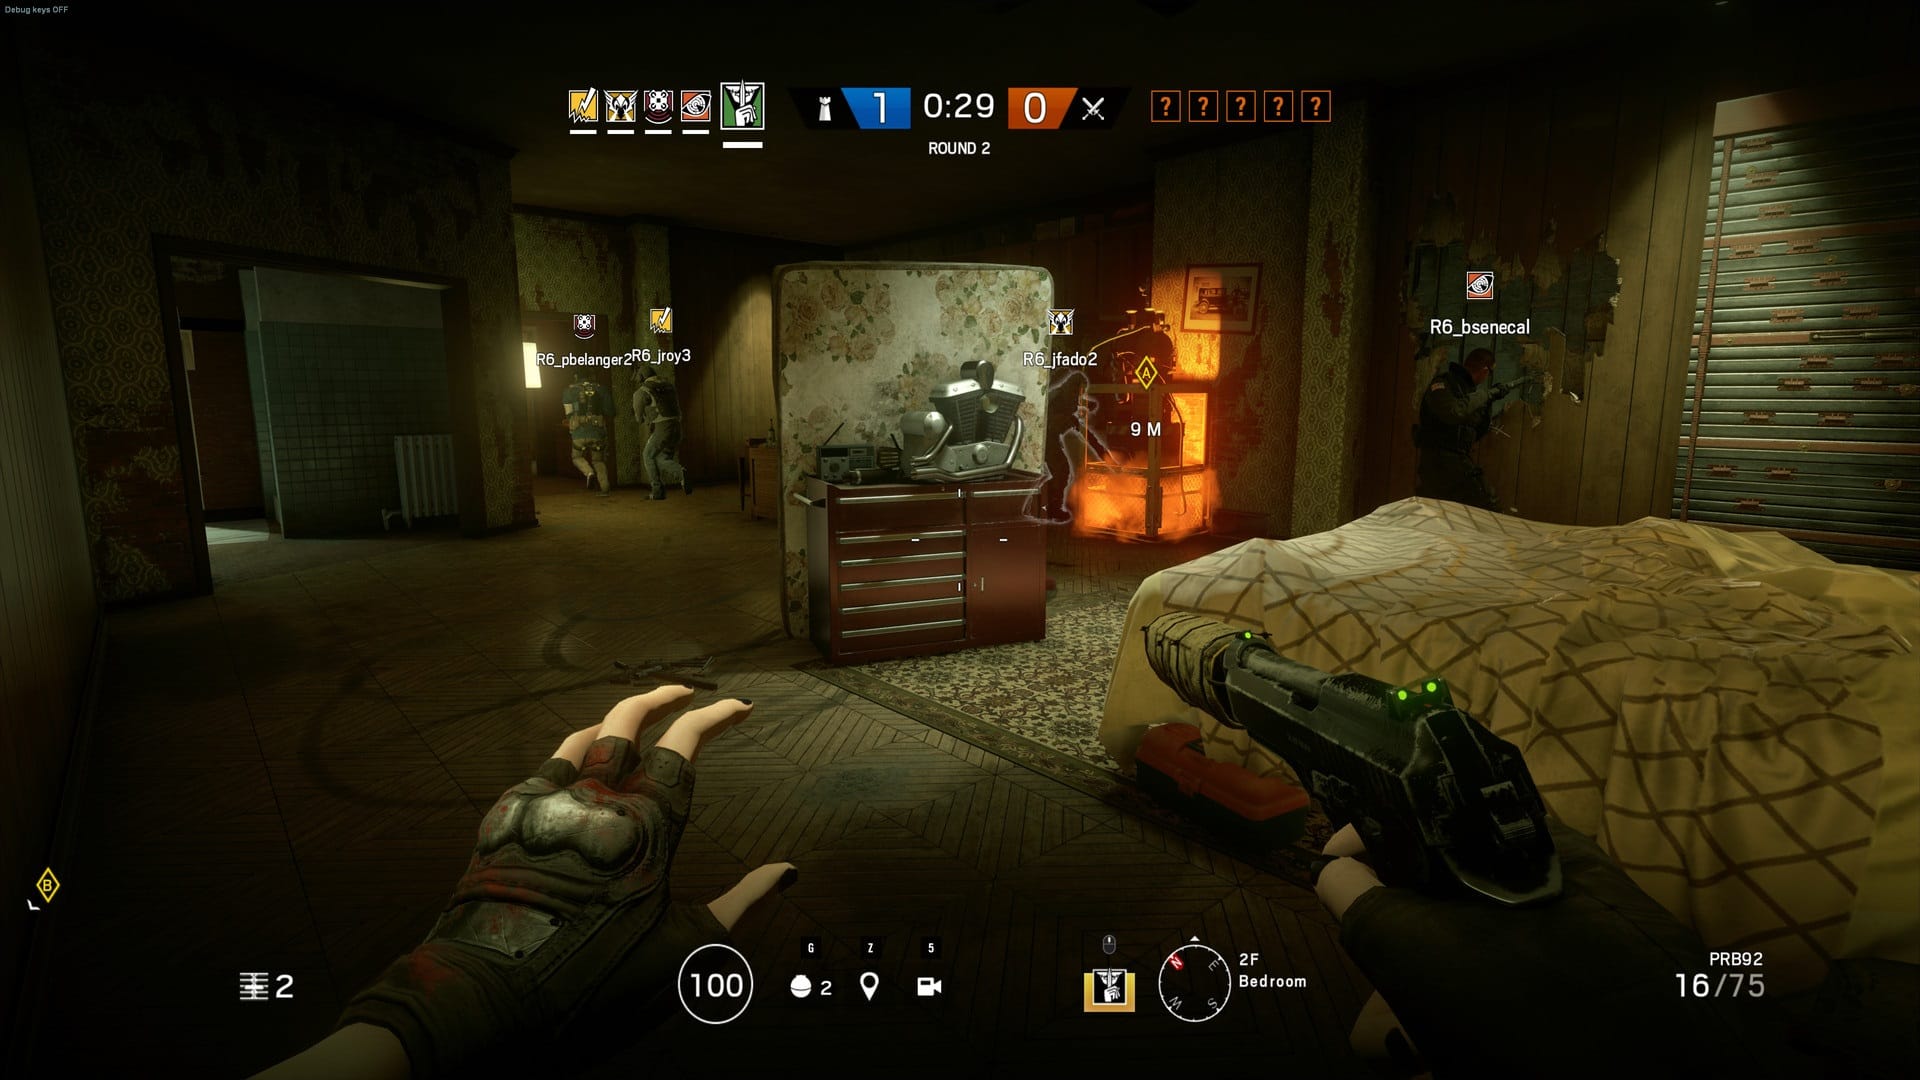 Best multiplayer games: Rainbow Six Siege. Image shows somebody with a gun in hand, preparing to defend their base with their friends.